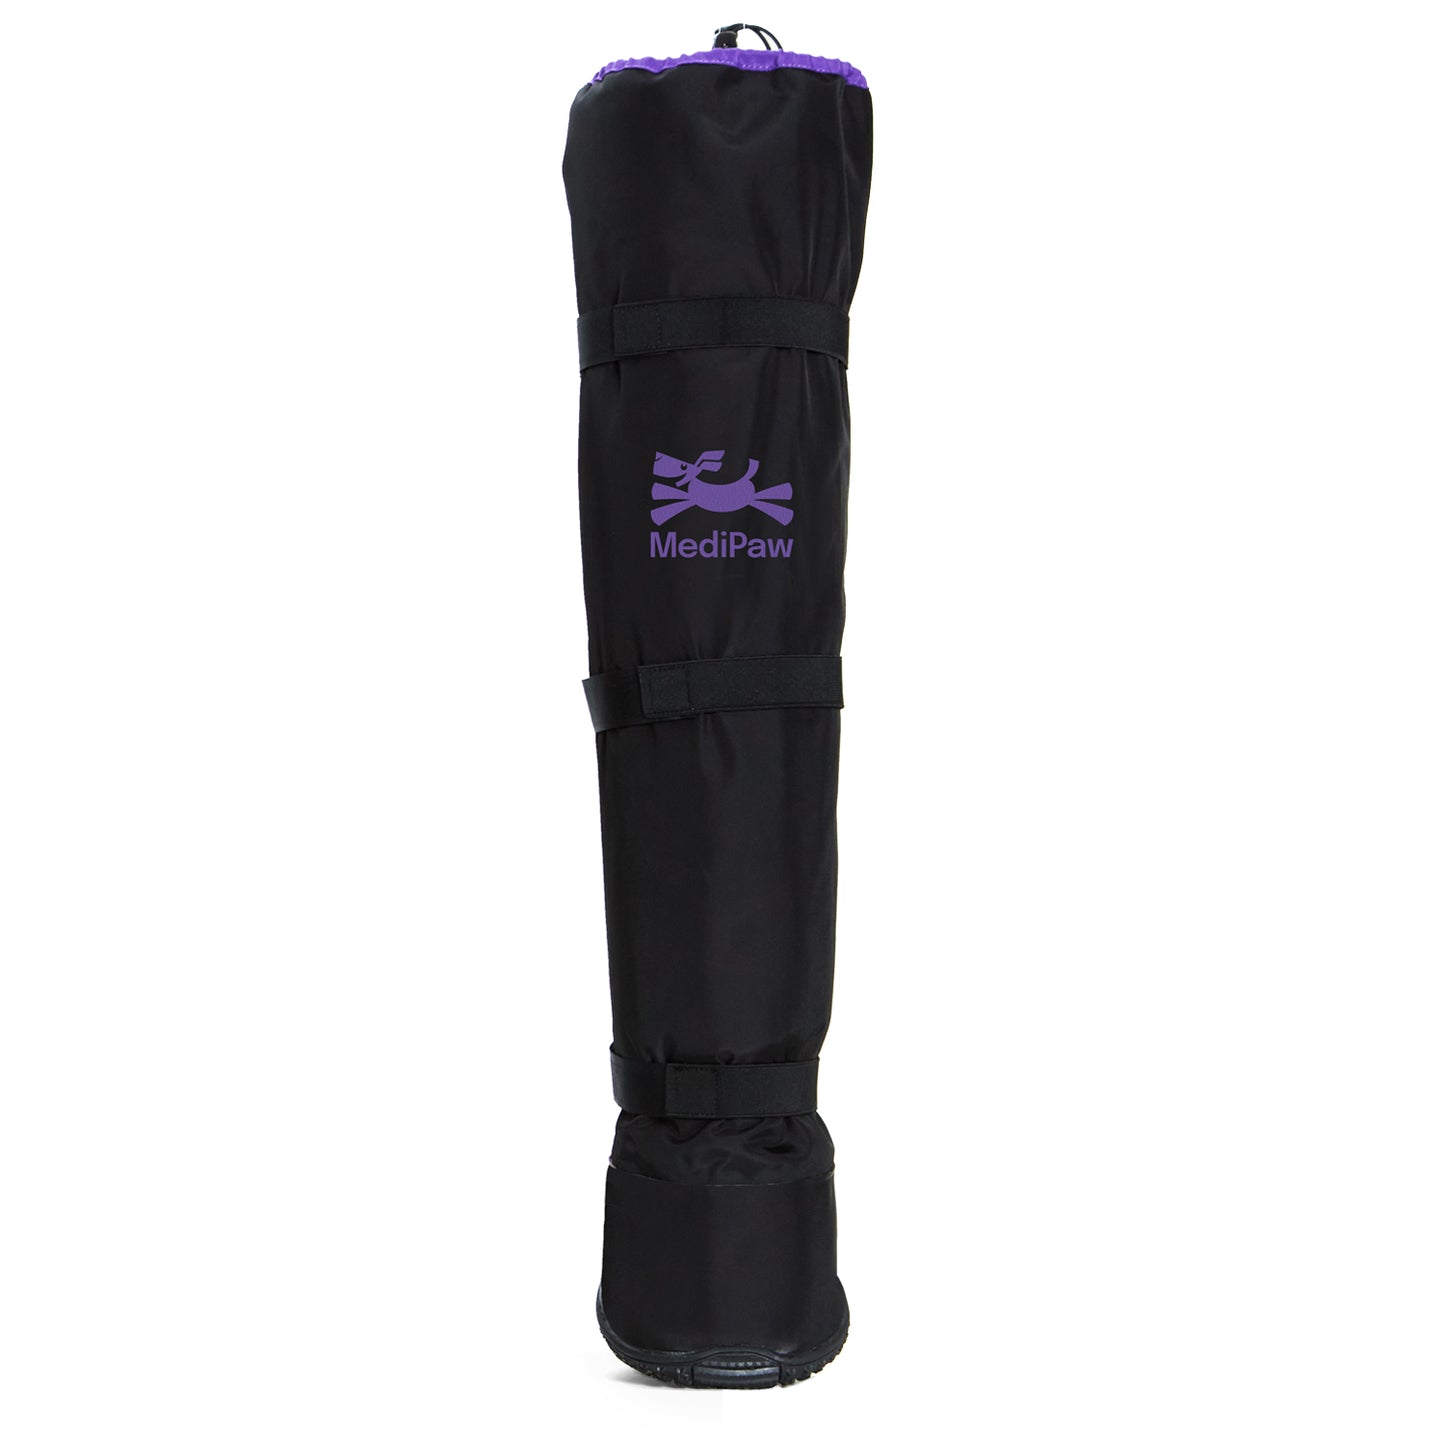 A black and purple bag with the Your Whole Dog: MediPaw: Rugged X-Boot logo on it.